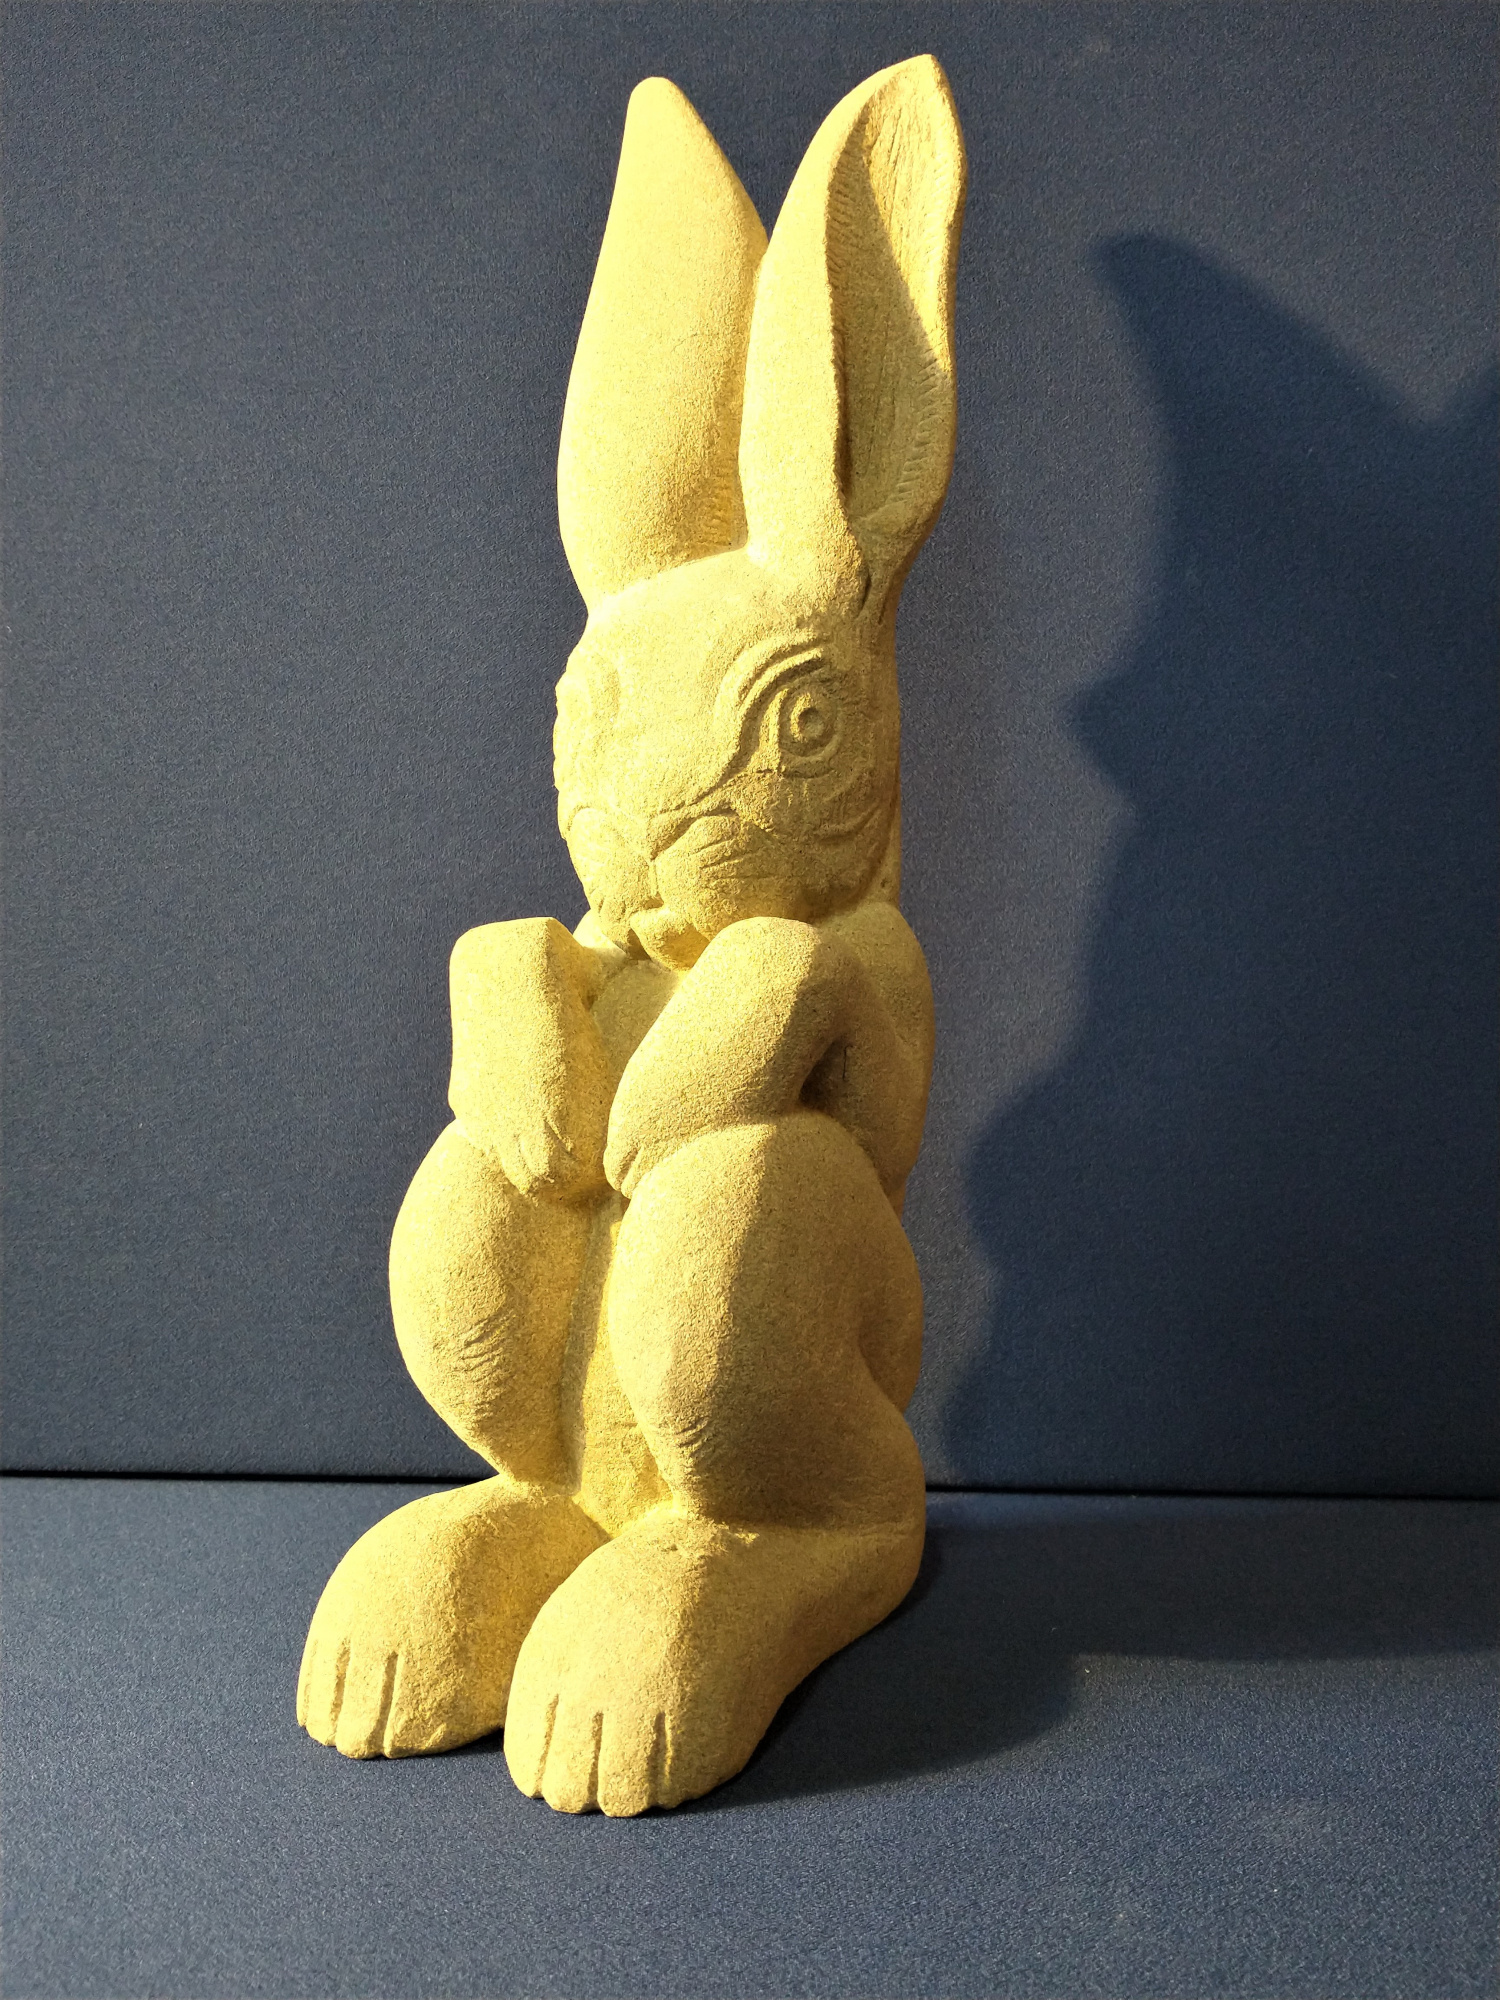 Hare (seated) by Nell Dalton